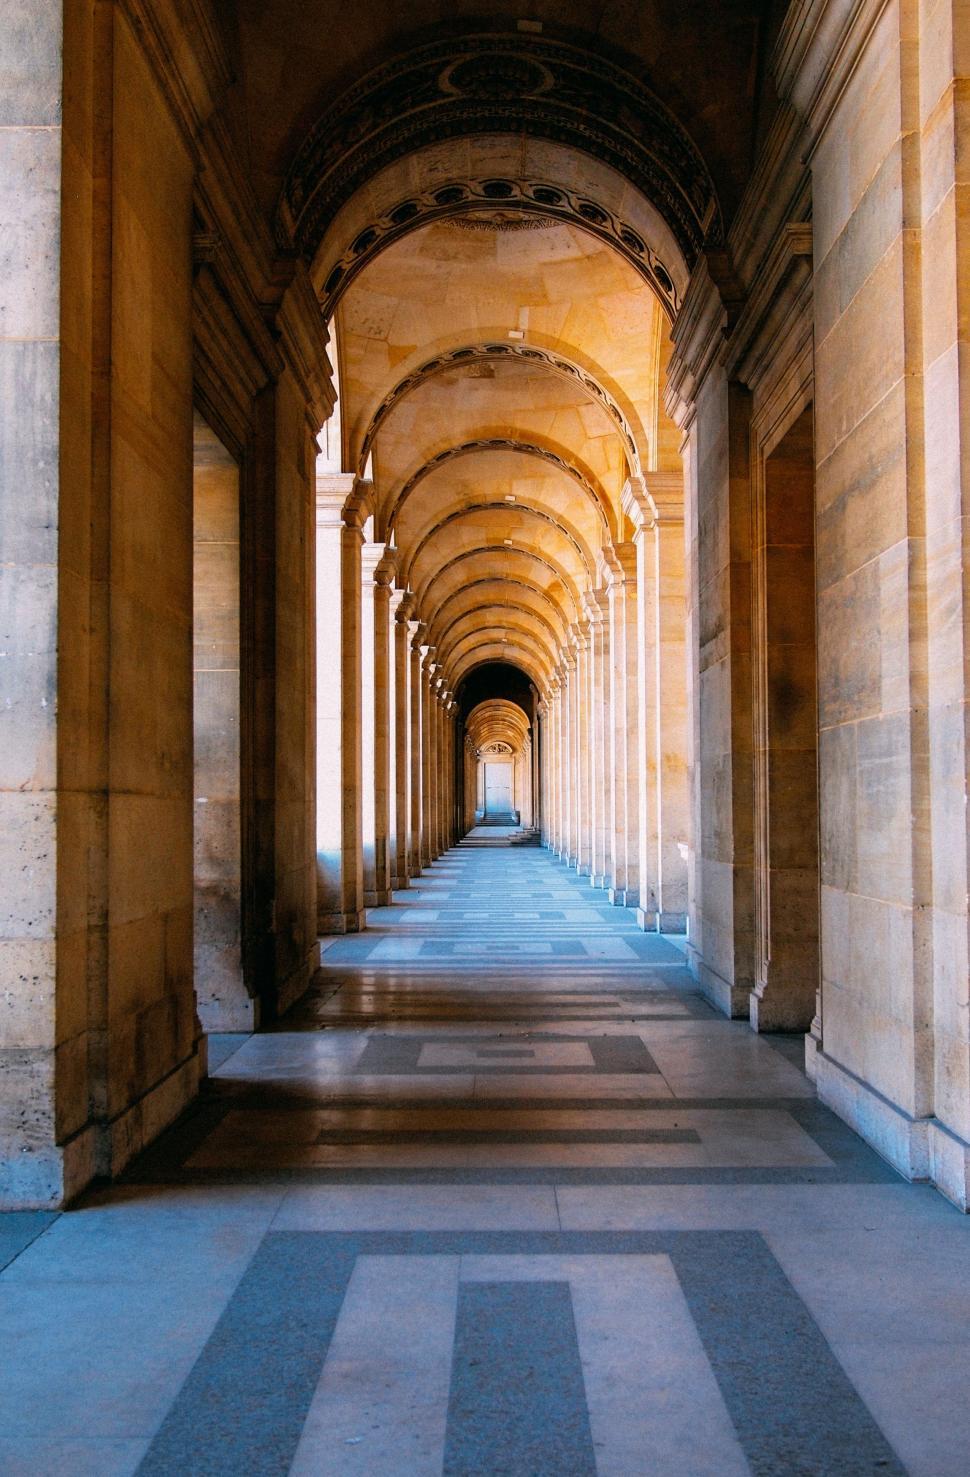 Free Image of Grand Hallway With Columns and Arches 